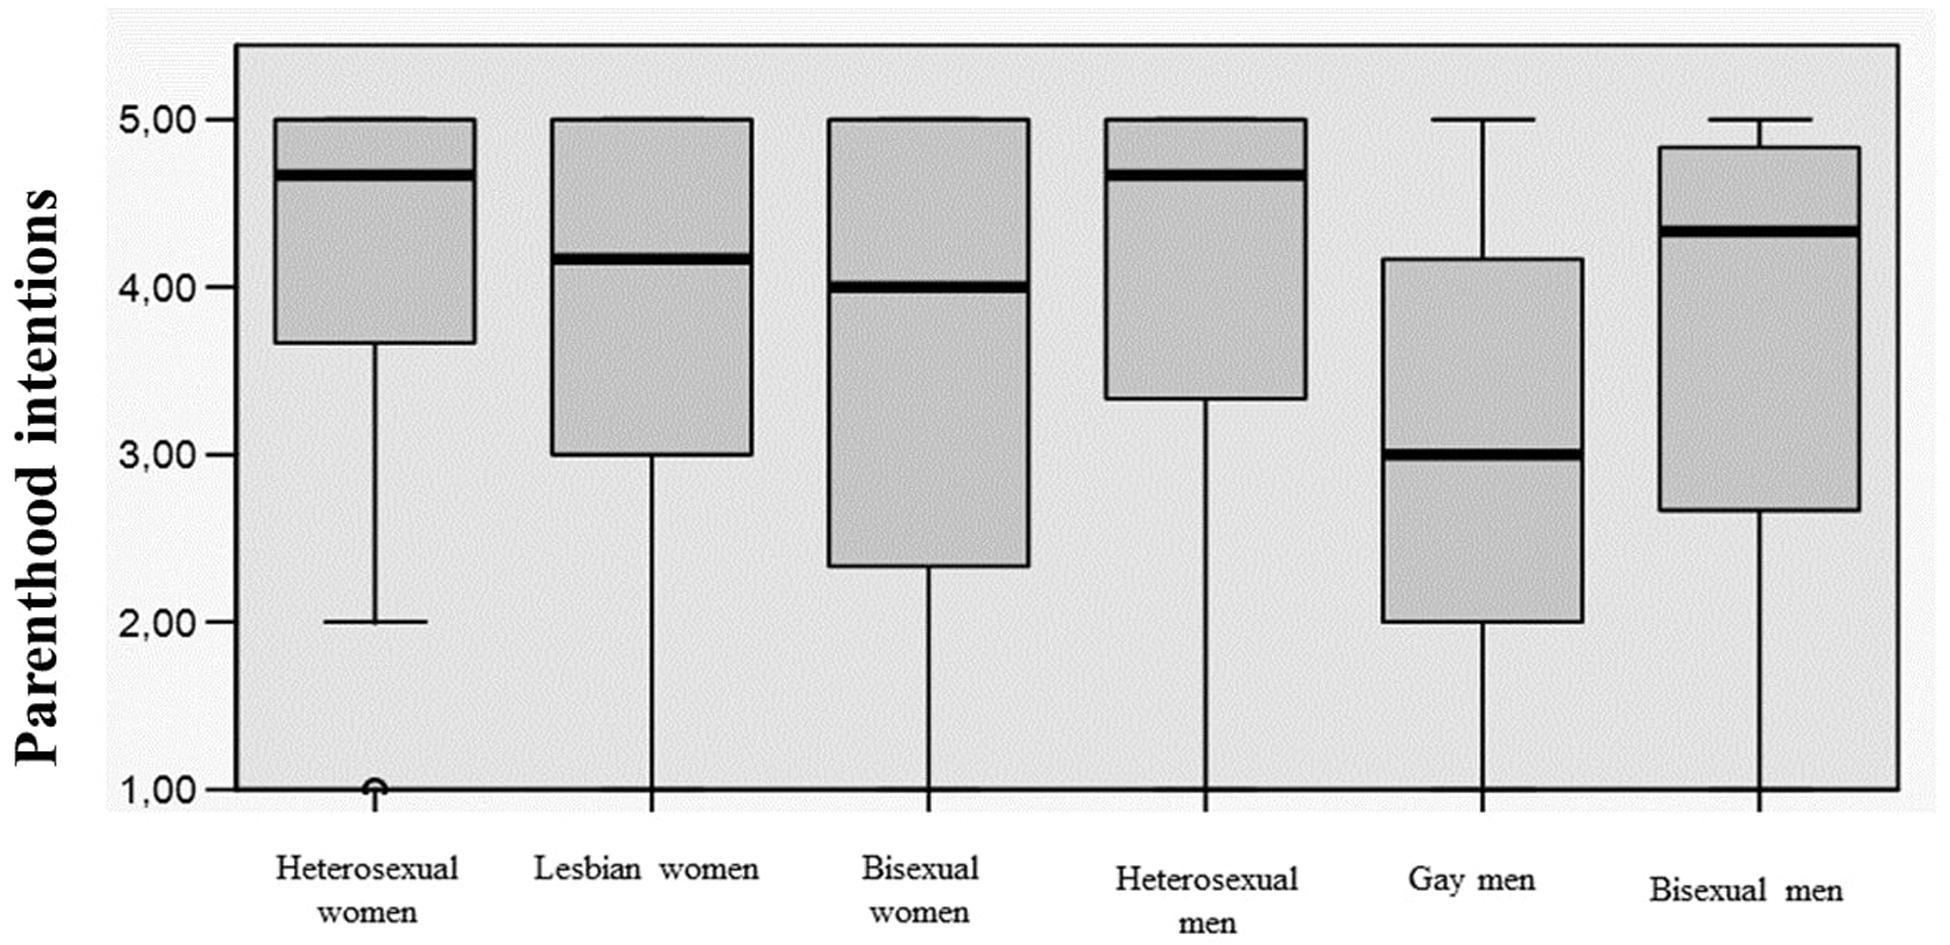 homosexuality and opposite sex friendships